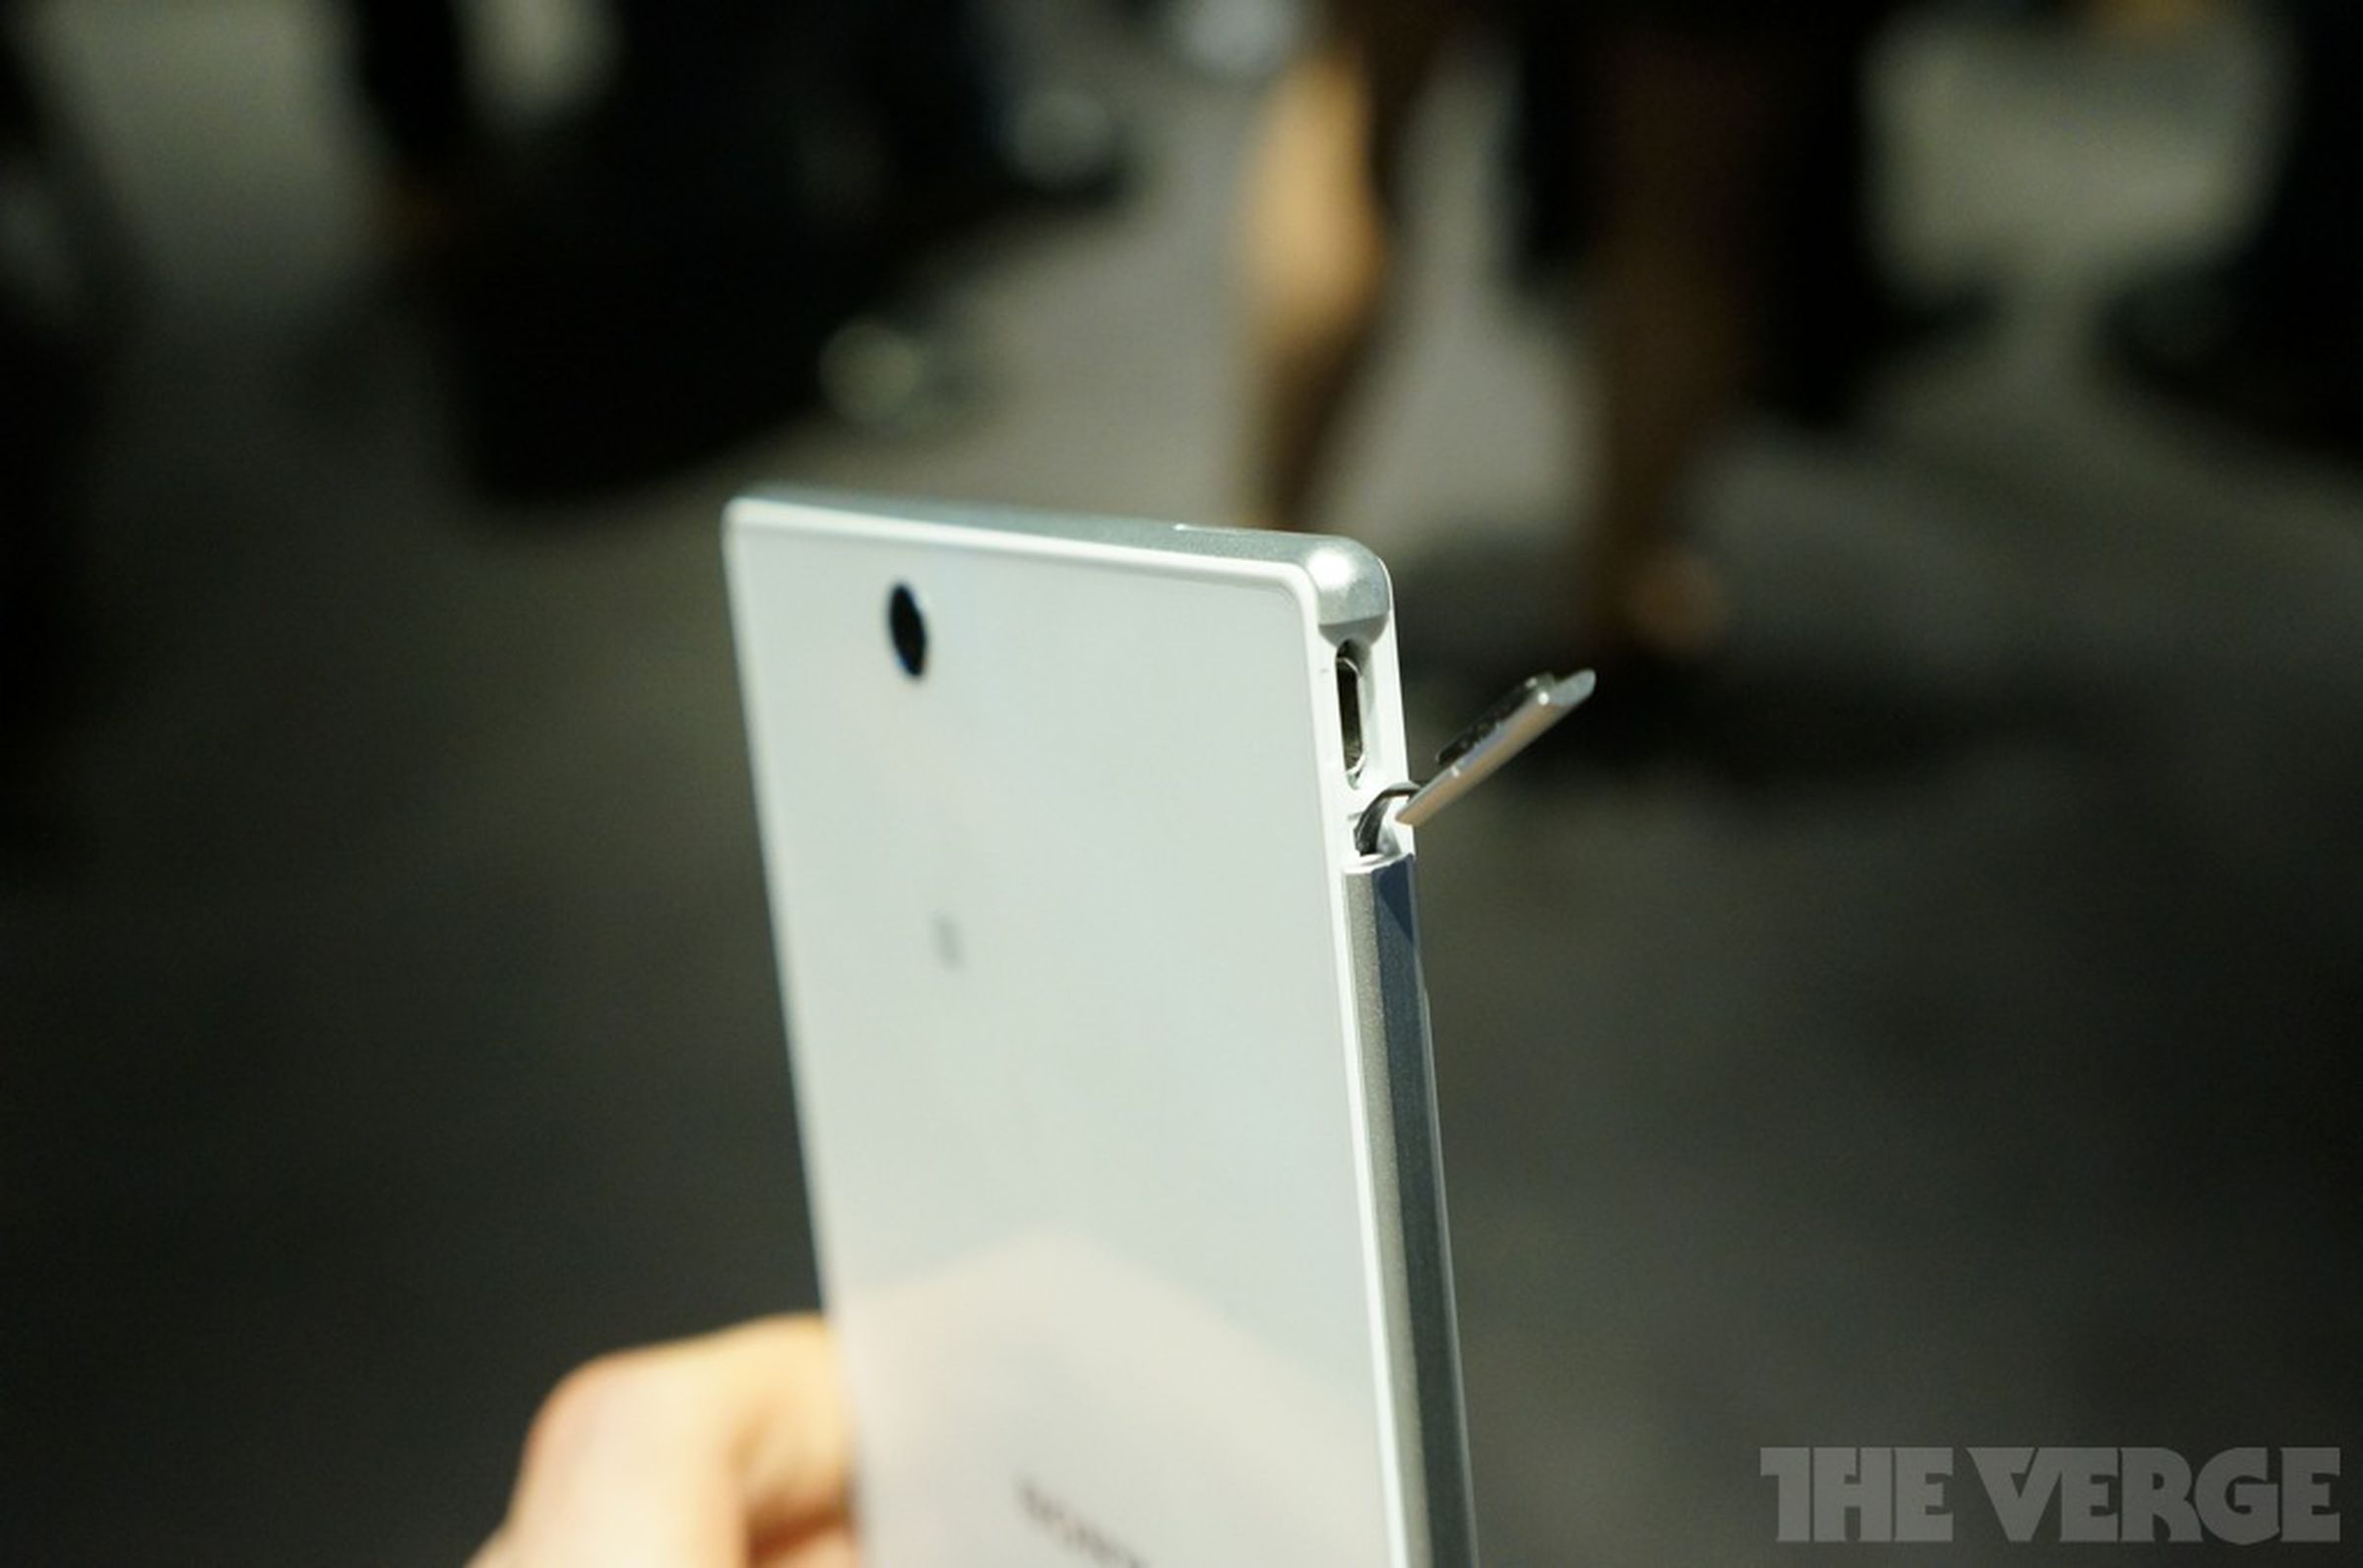 Sony Xperia Z Ultra hands-on pictures